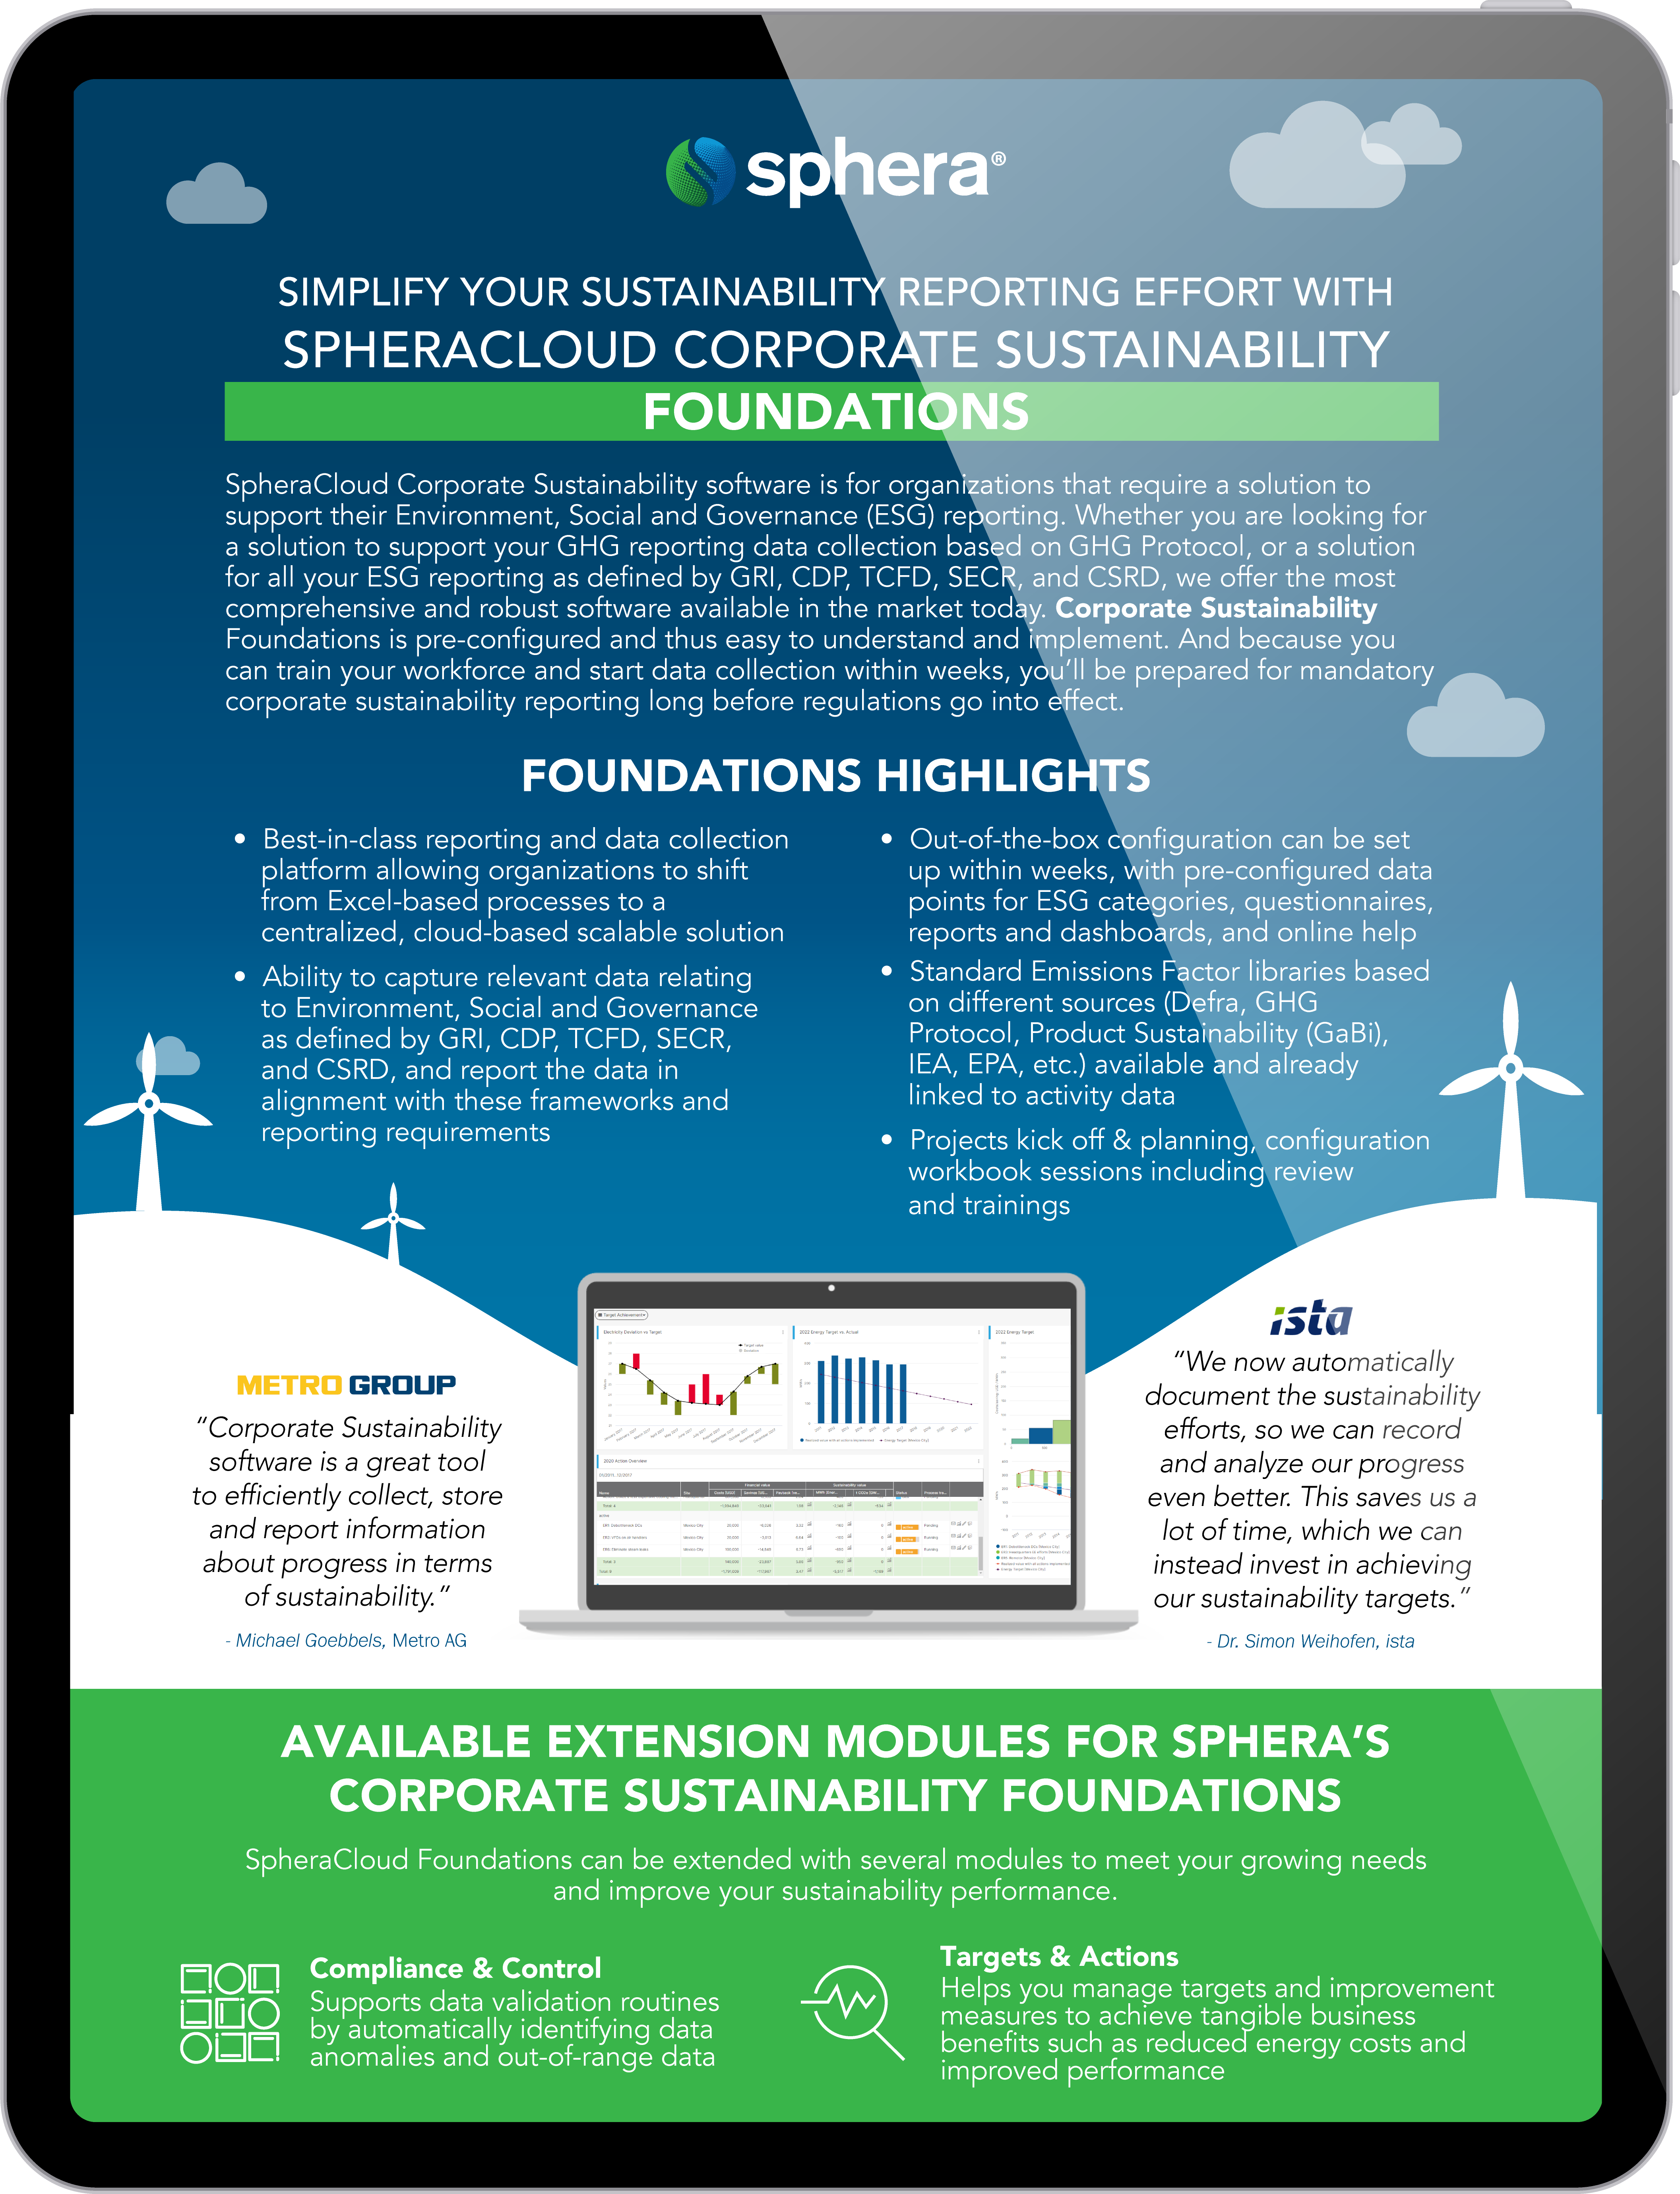 Simplify Your Sustainability Reporting Effort with SpheraCloud Corporate Sustainability Foundations 